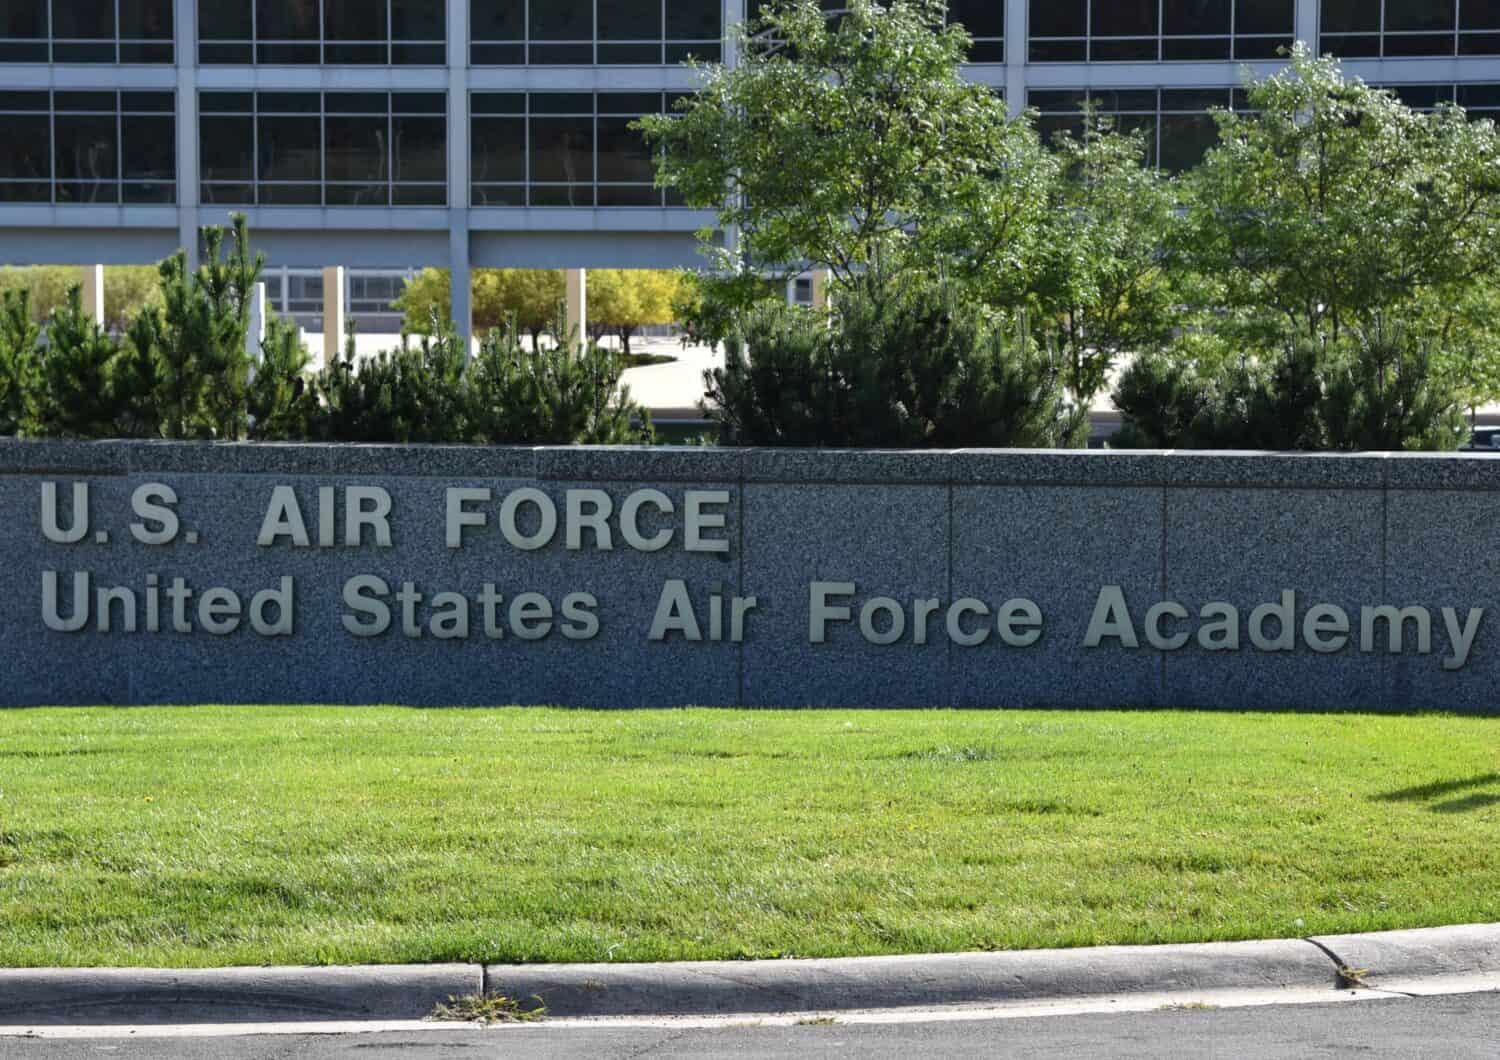 Entrance sign at the United States Air Force Academy in Colorado